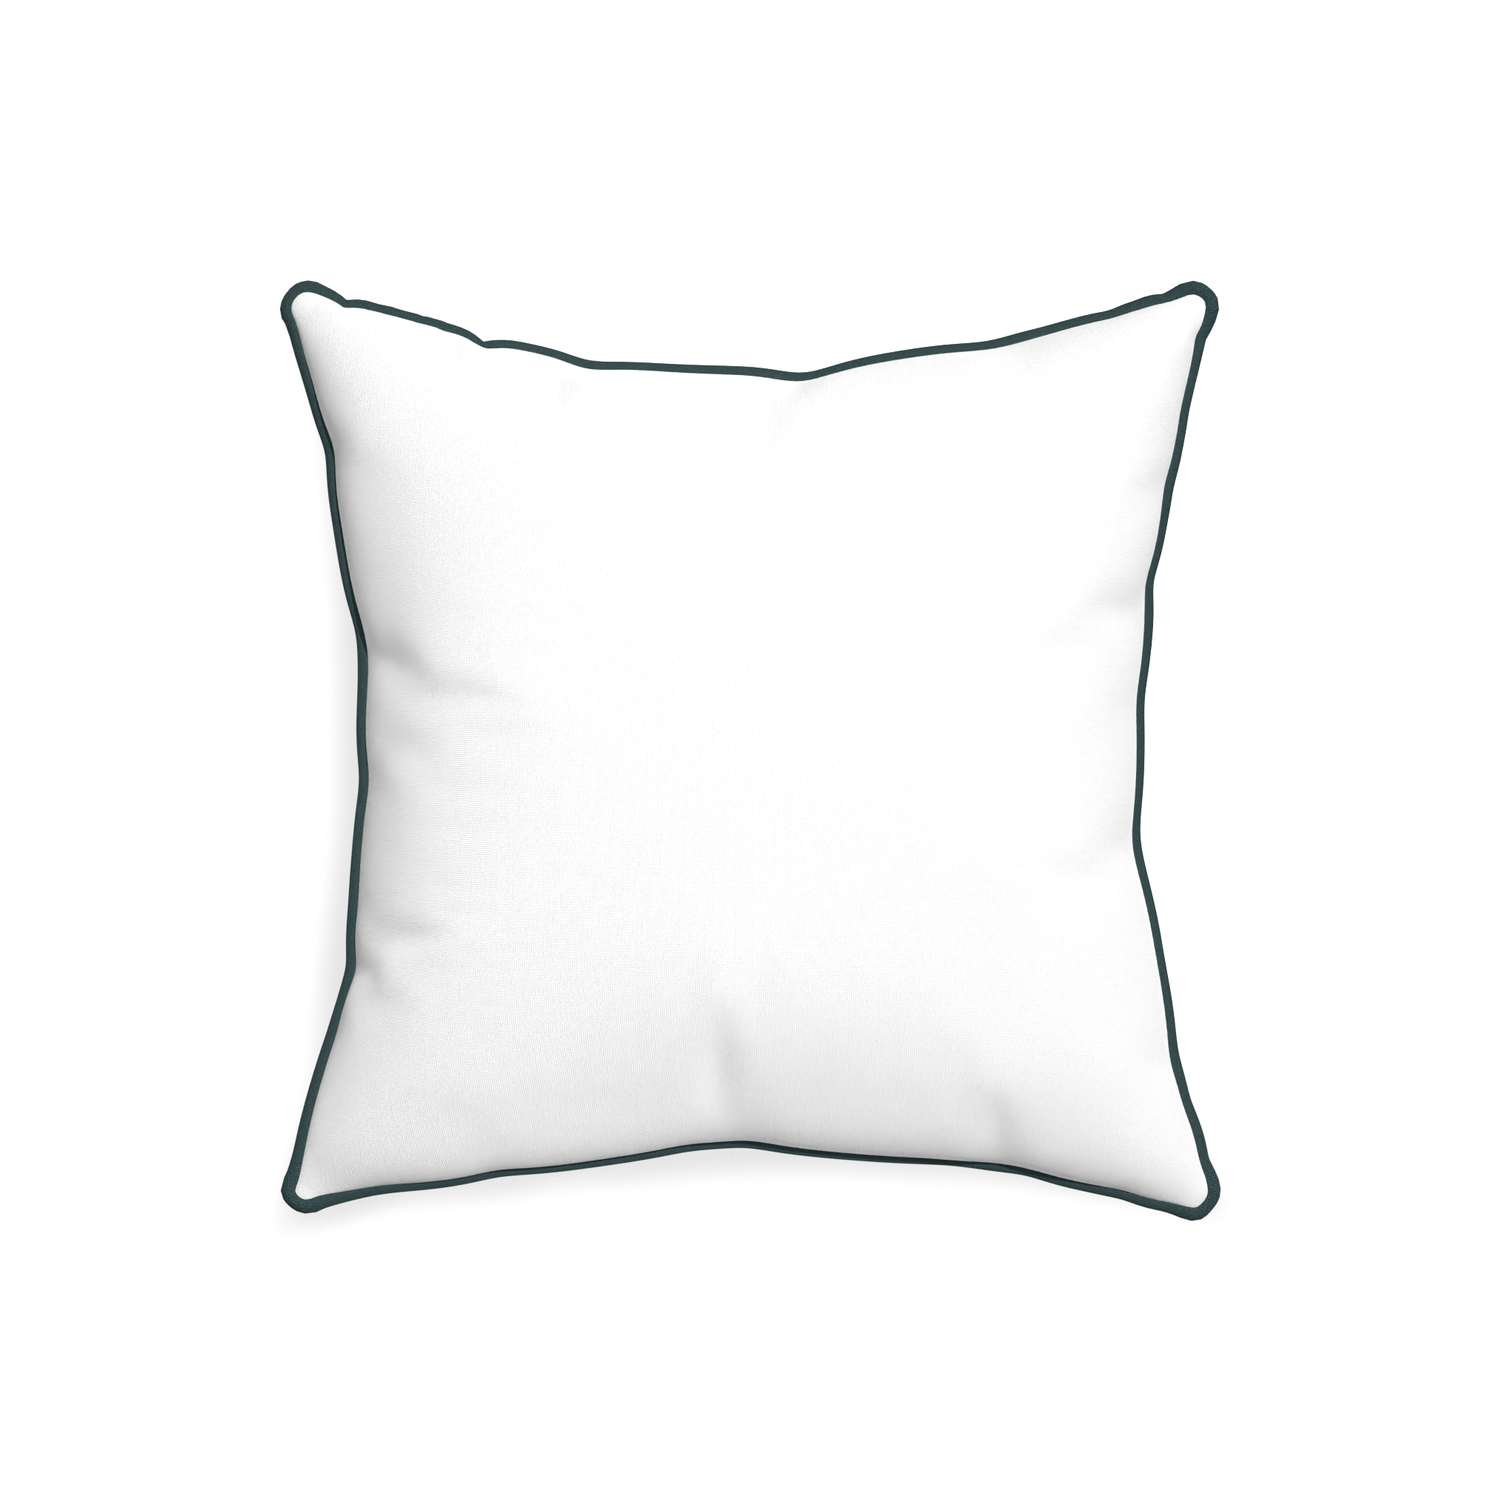 20-square snow custom white cottonpillow with p piping on white background